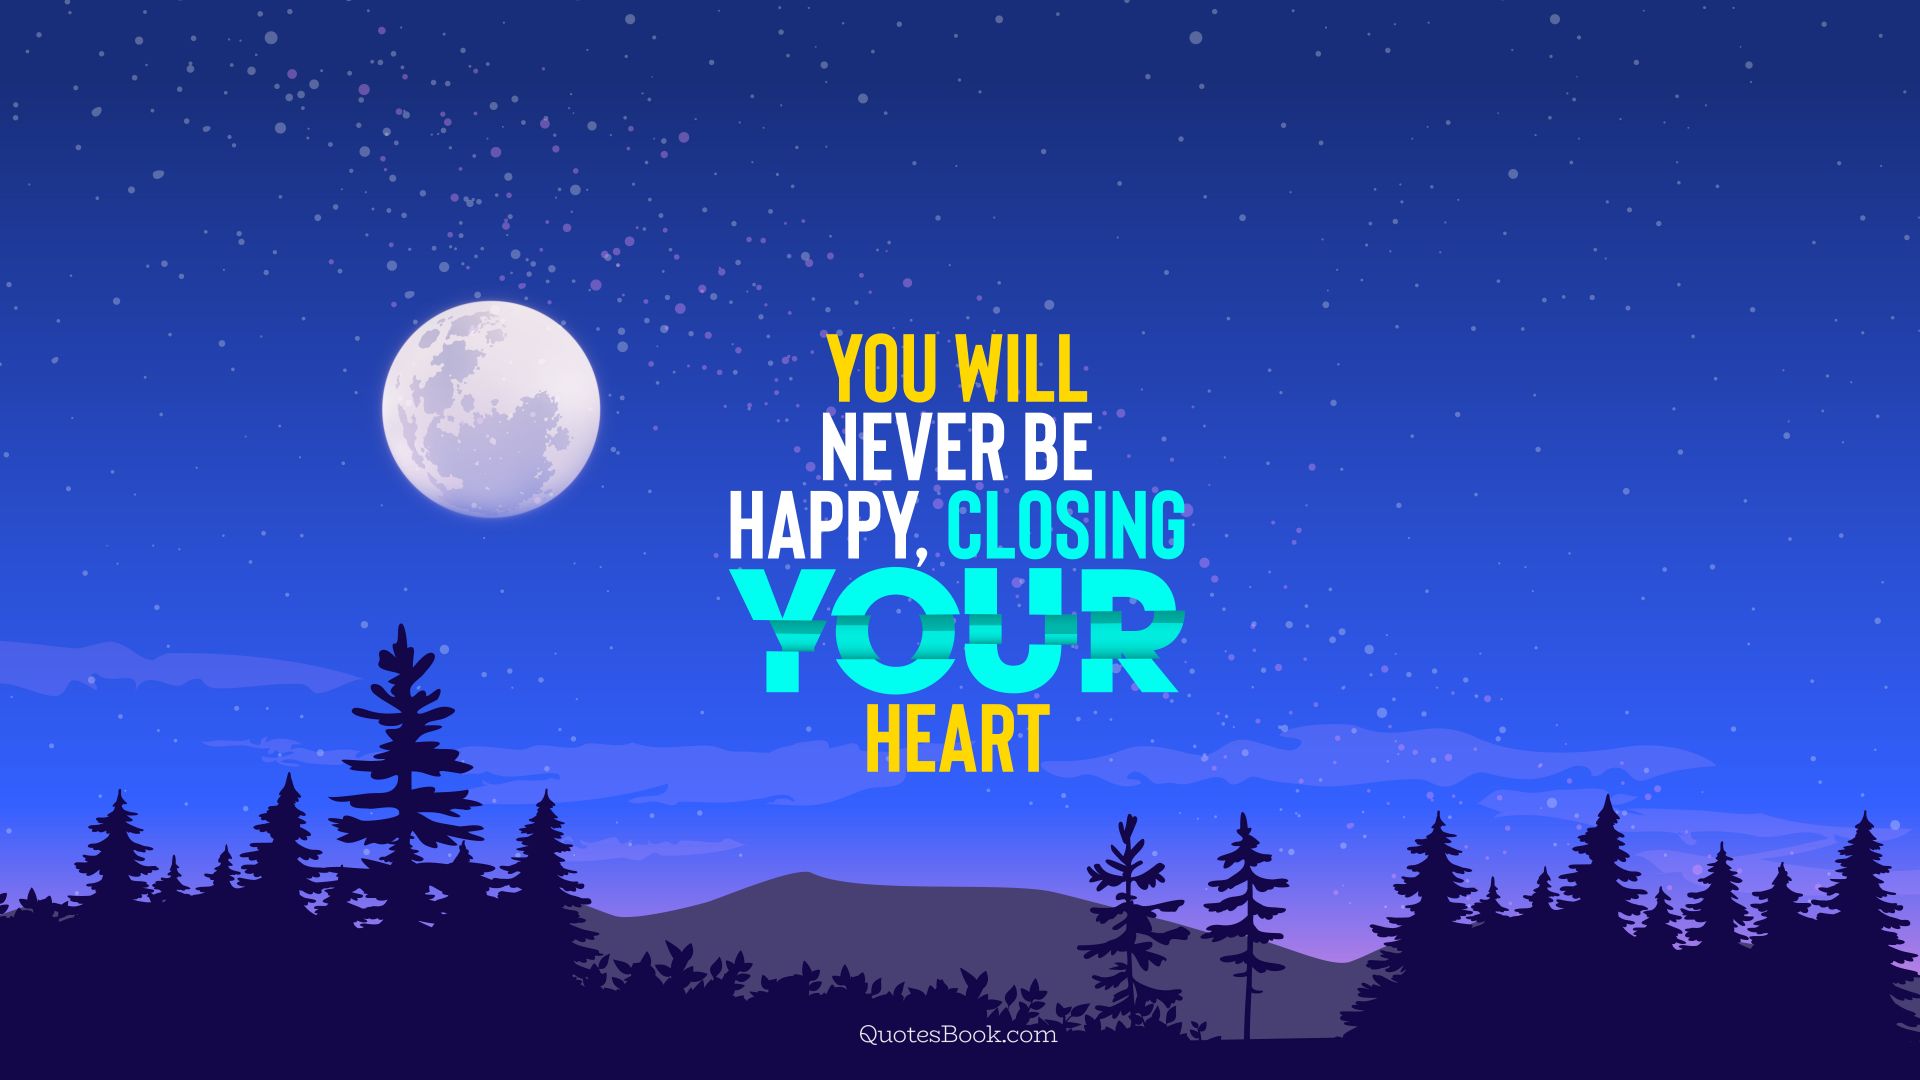 You will never be happy, closing your heart. - Quote by QuotesBook